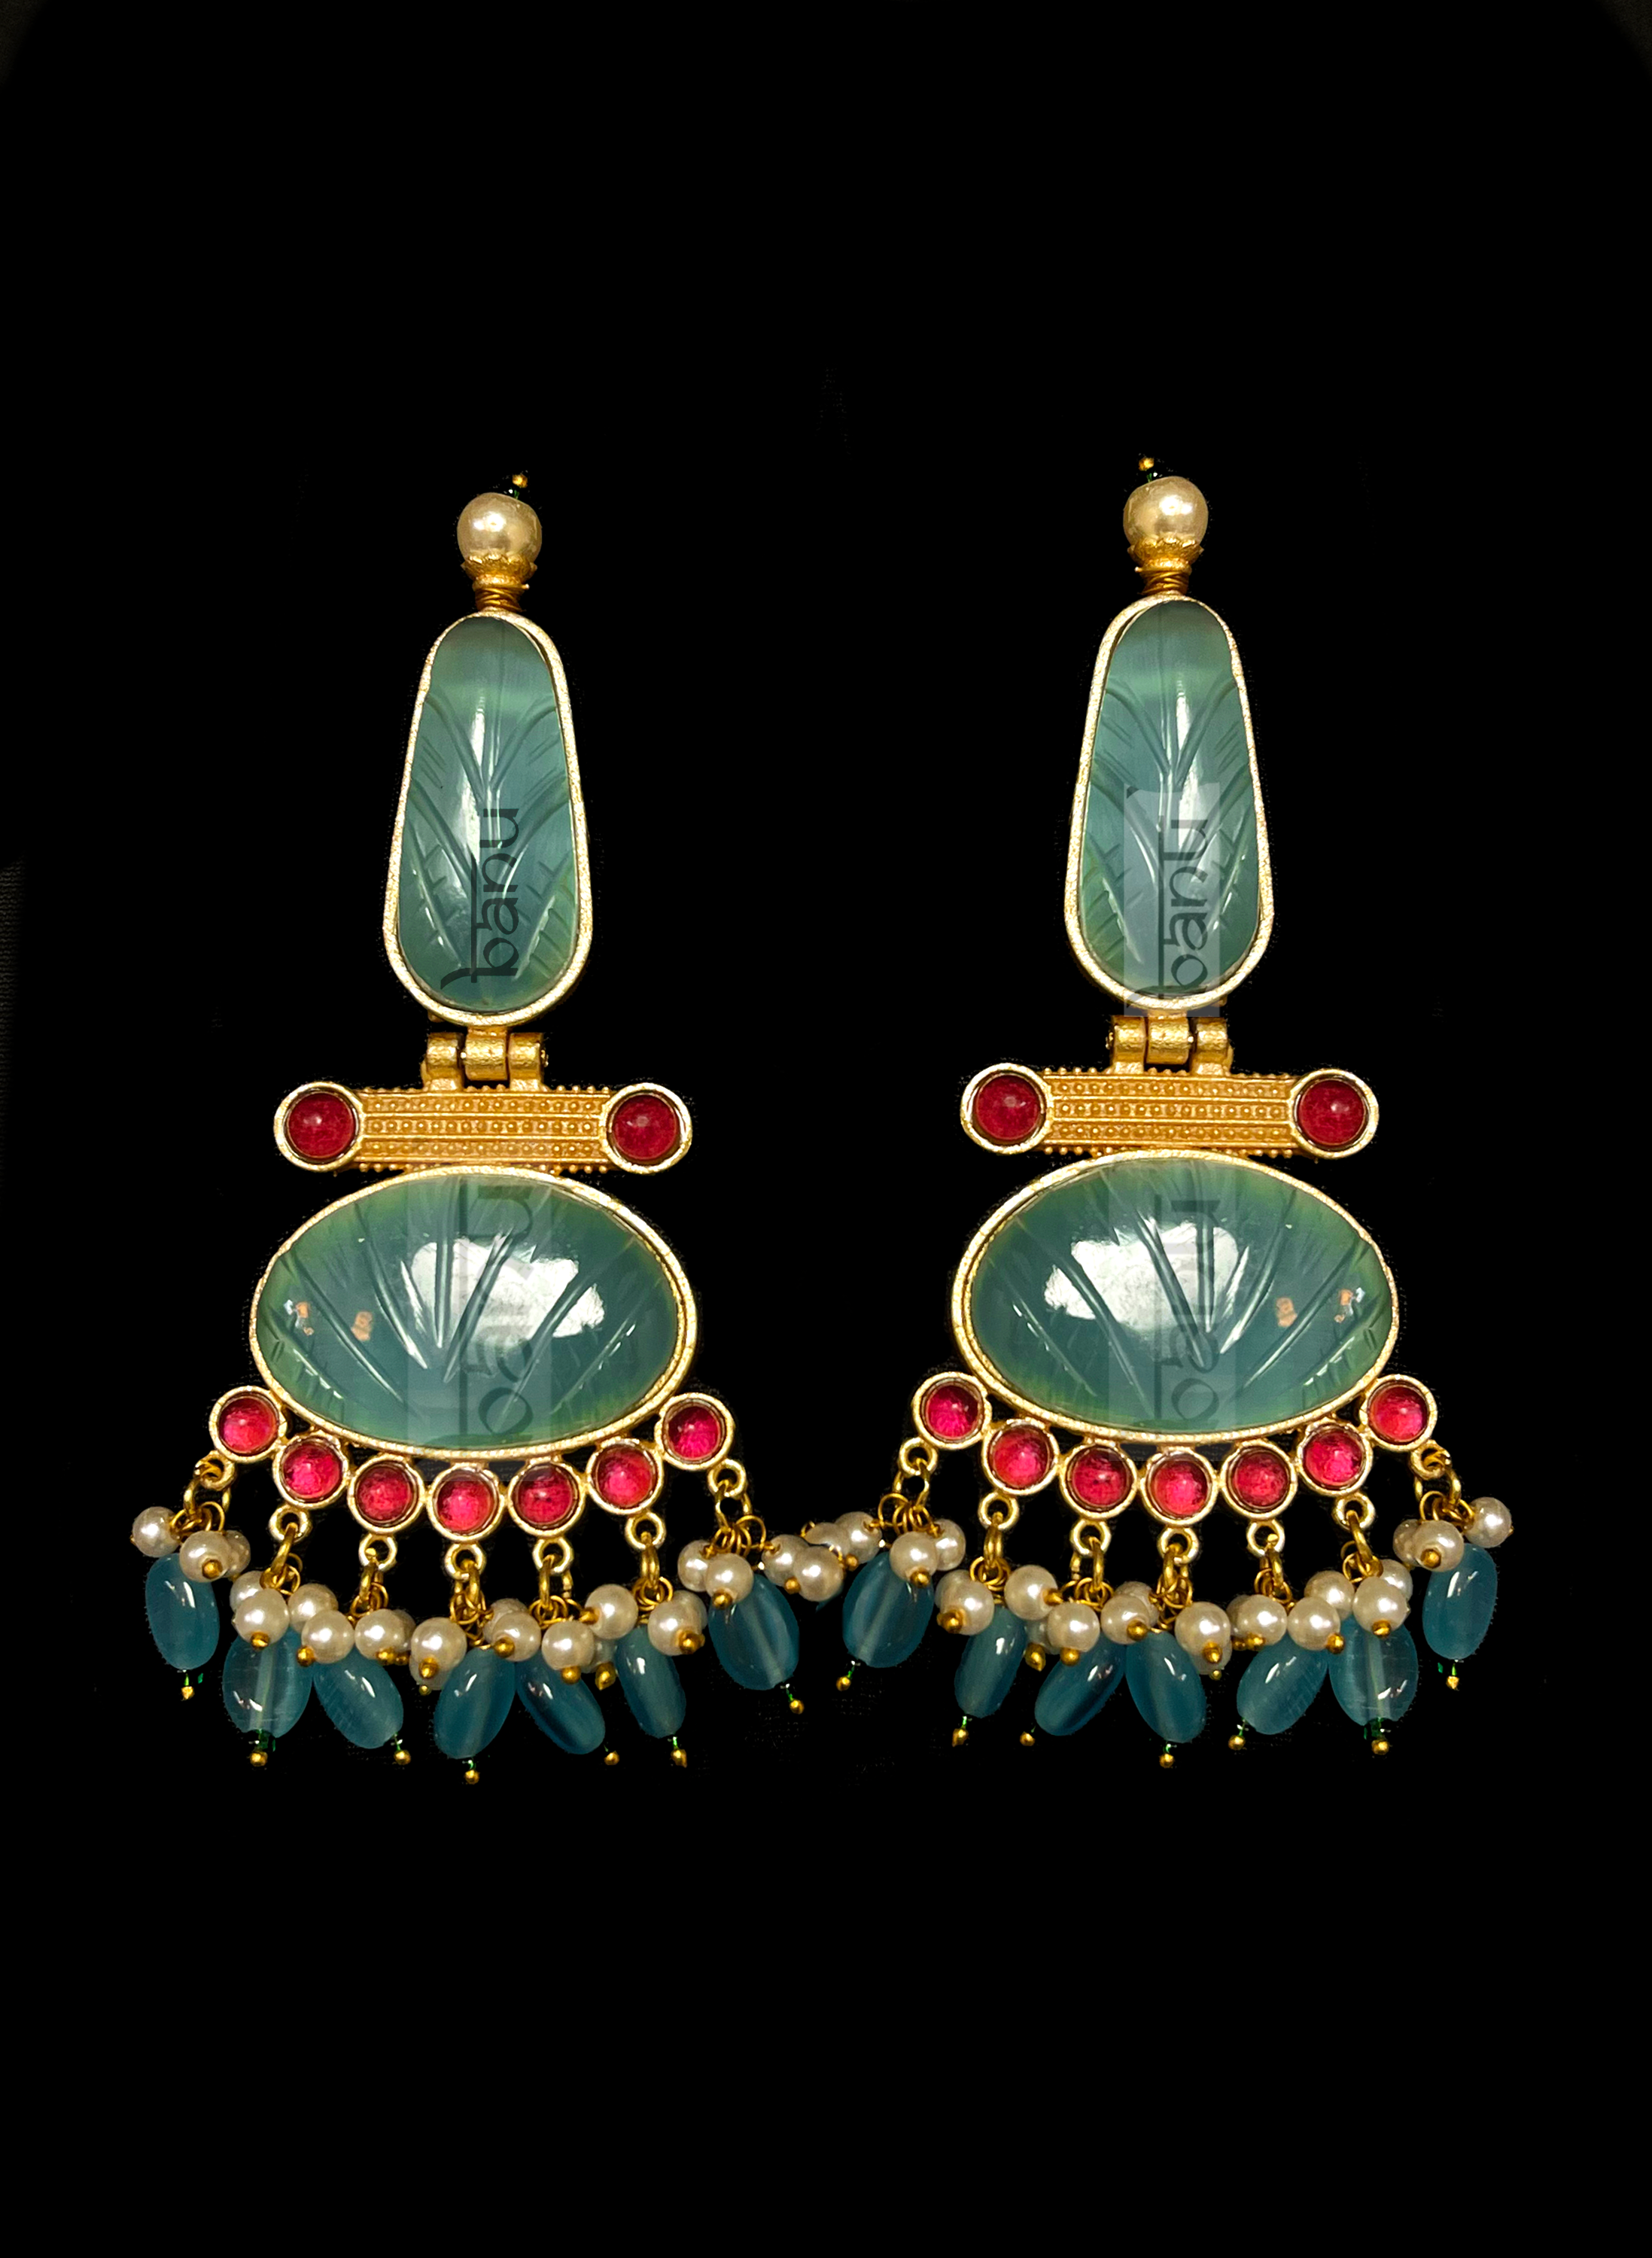 Women's Amarpali Earrings in Blue with Pearls & Red Onyx